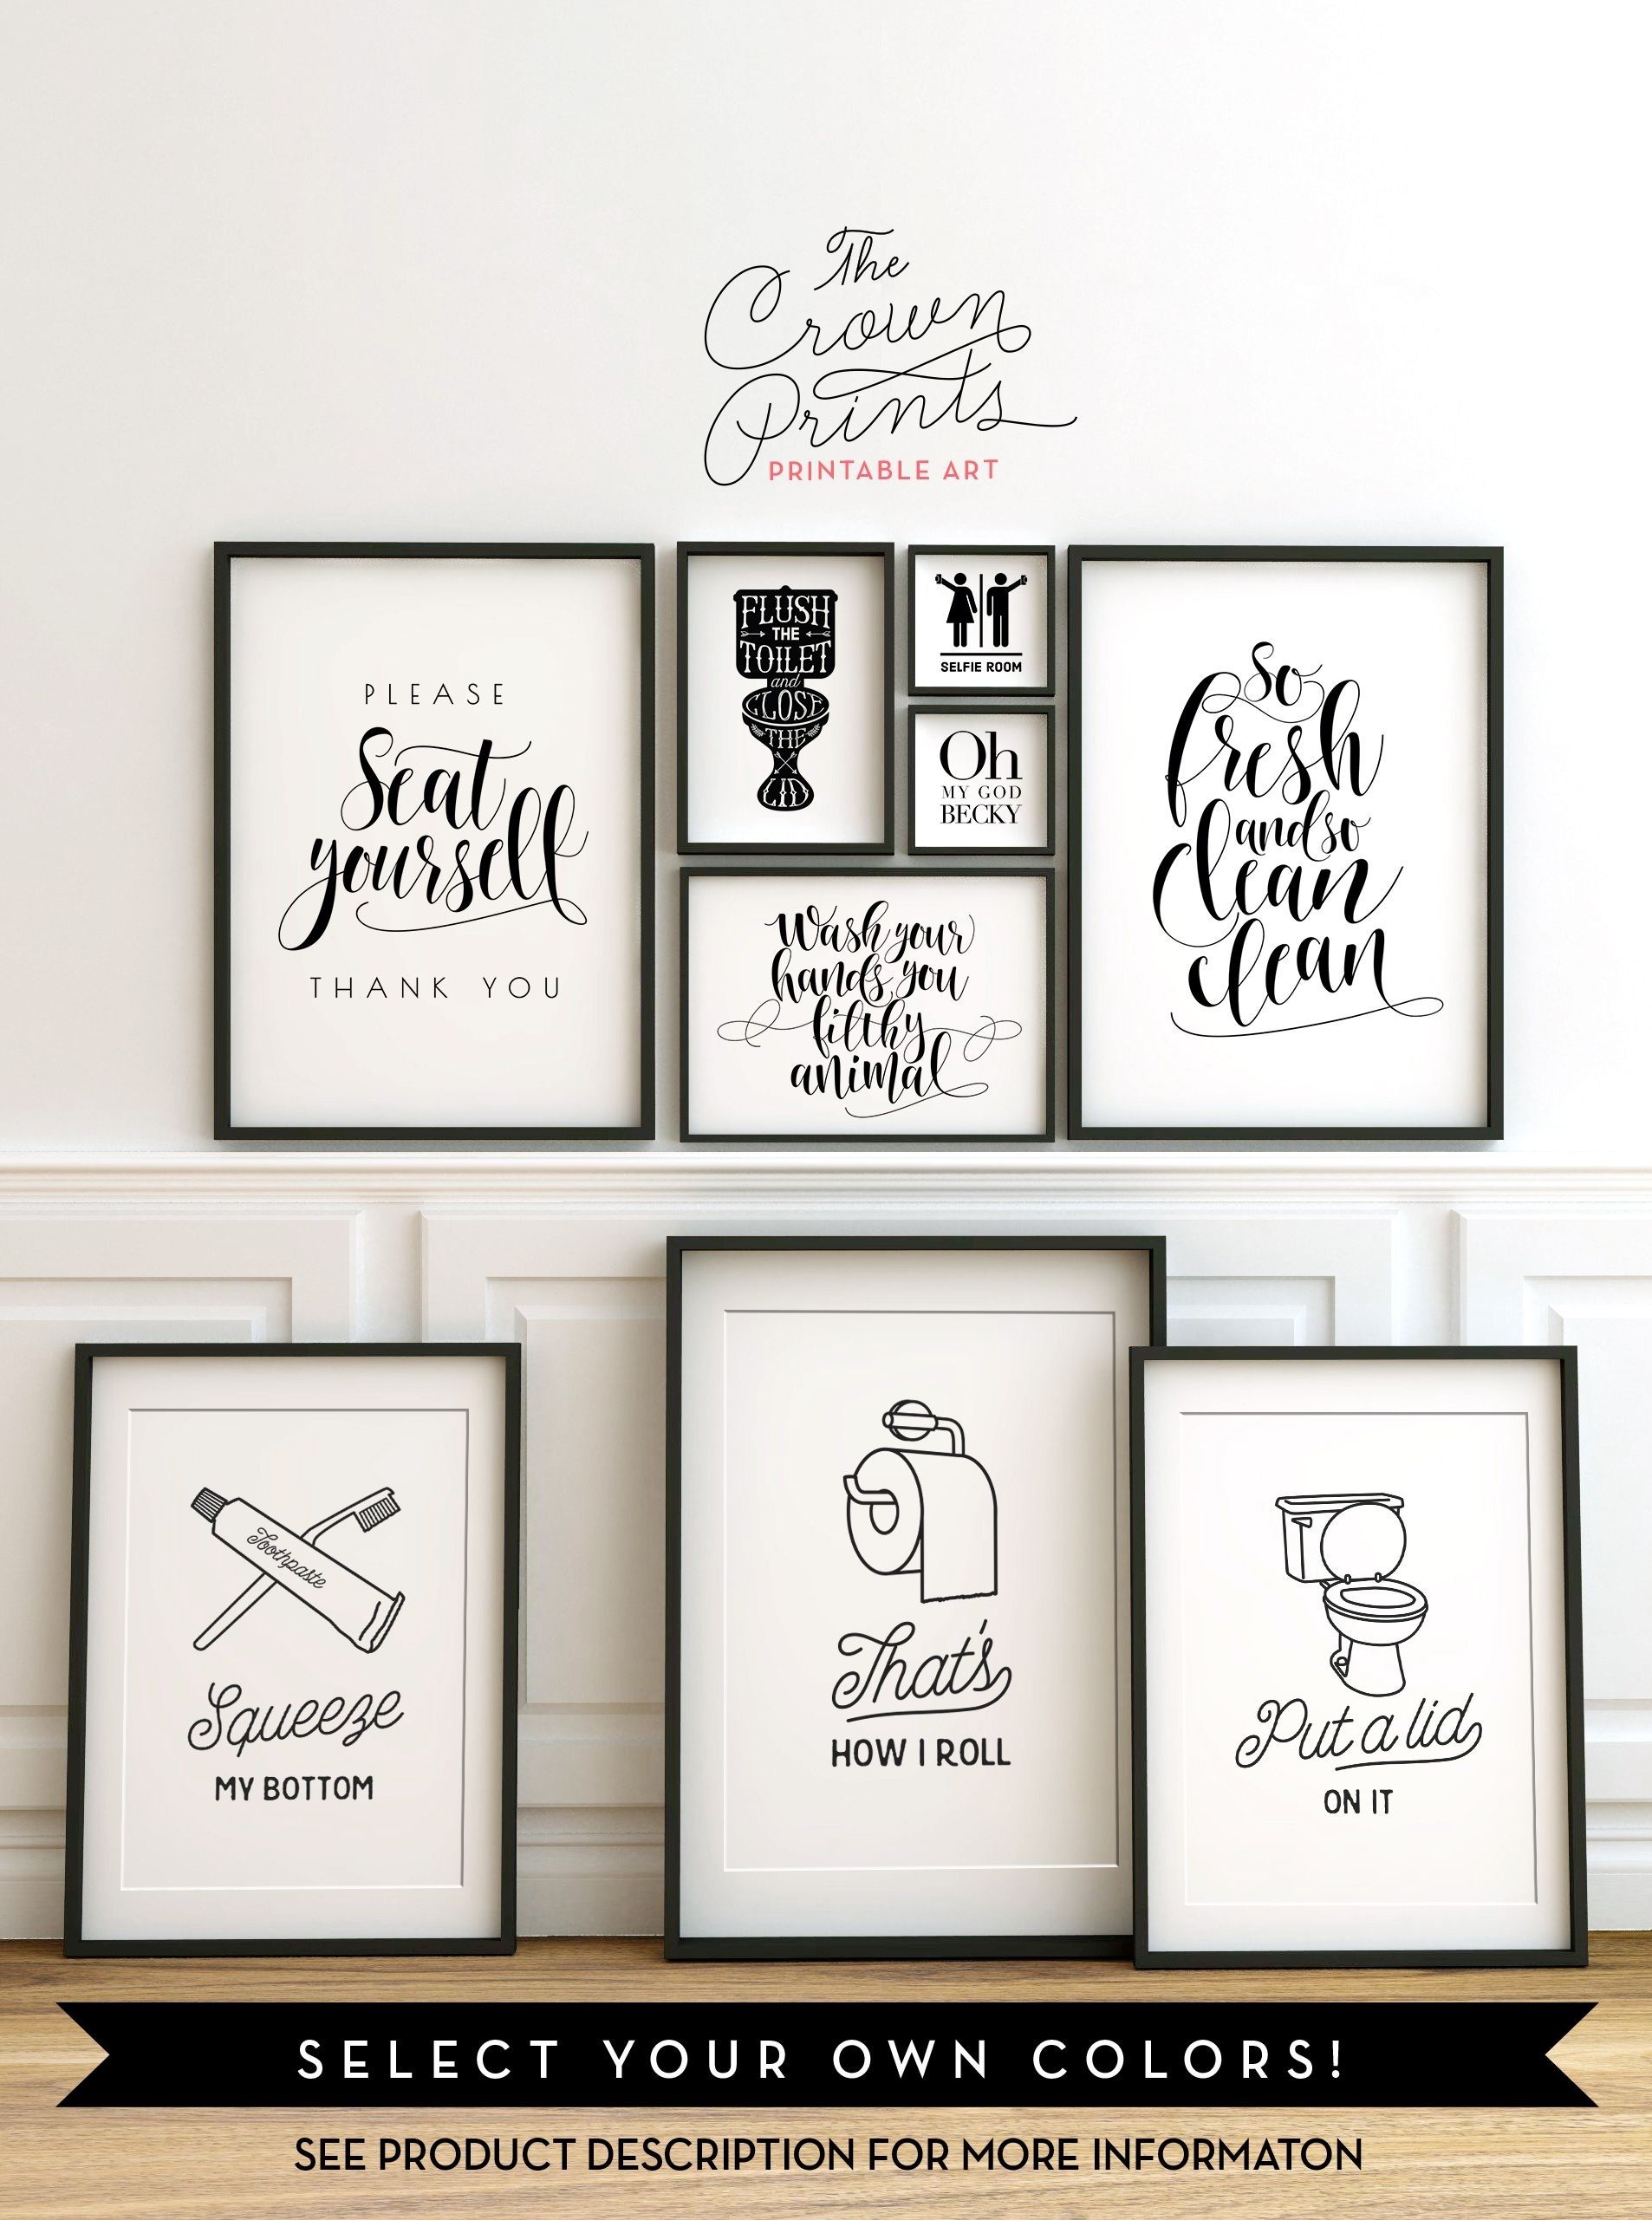 Printable Bathroom Wall Art From The Crown Prints On Etsy – Lots Of Within Current Bathroom Wall Art Decors (View 1 of 15)